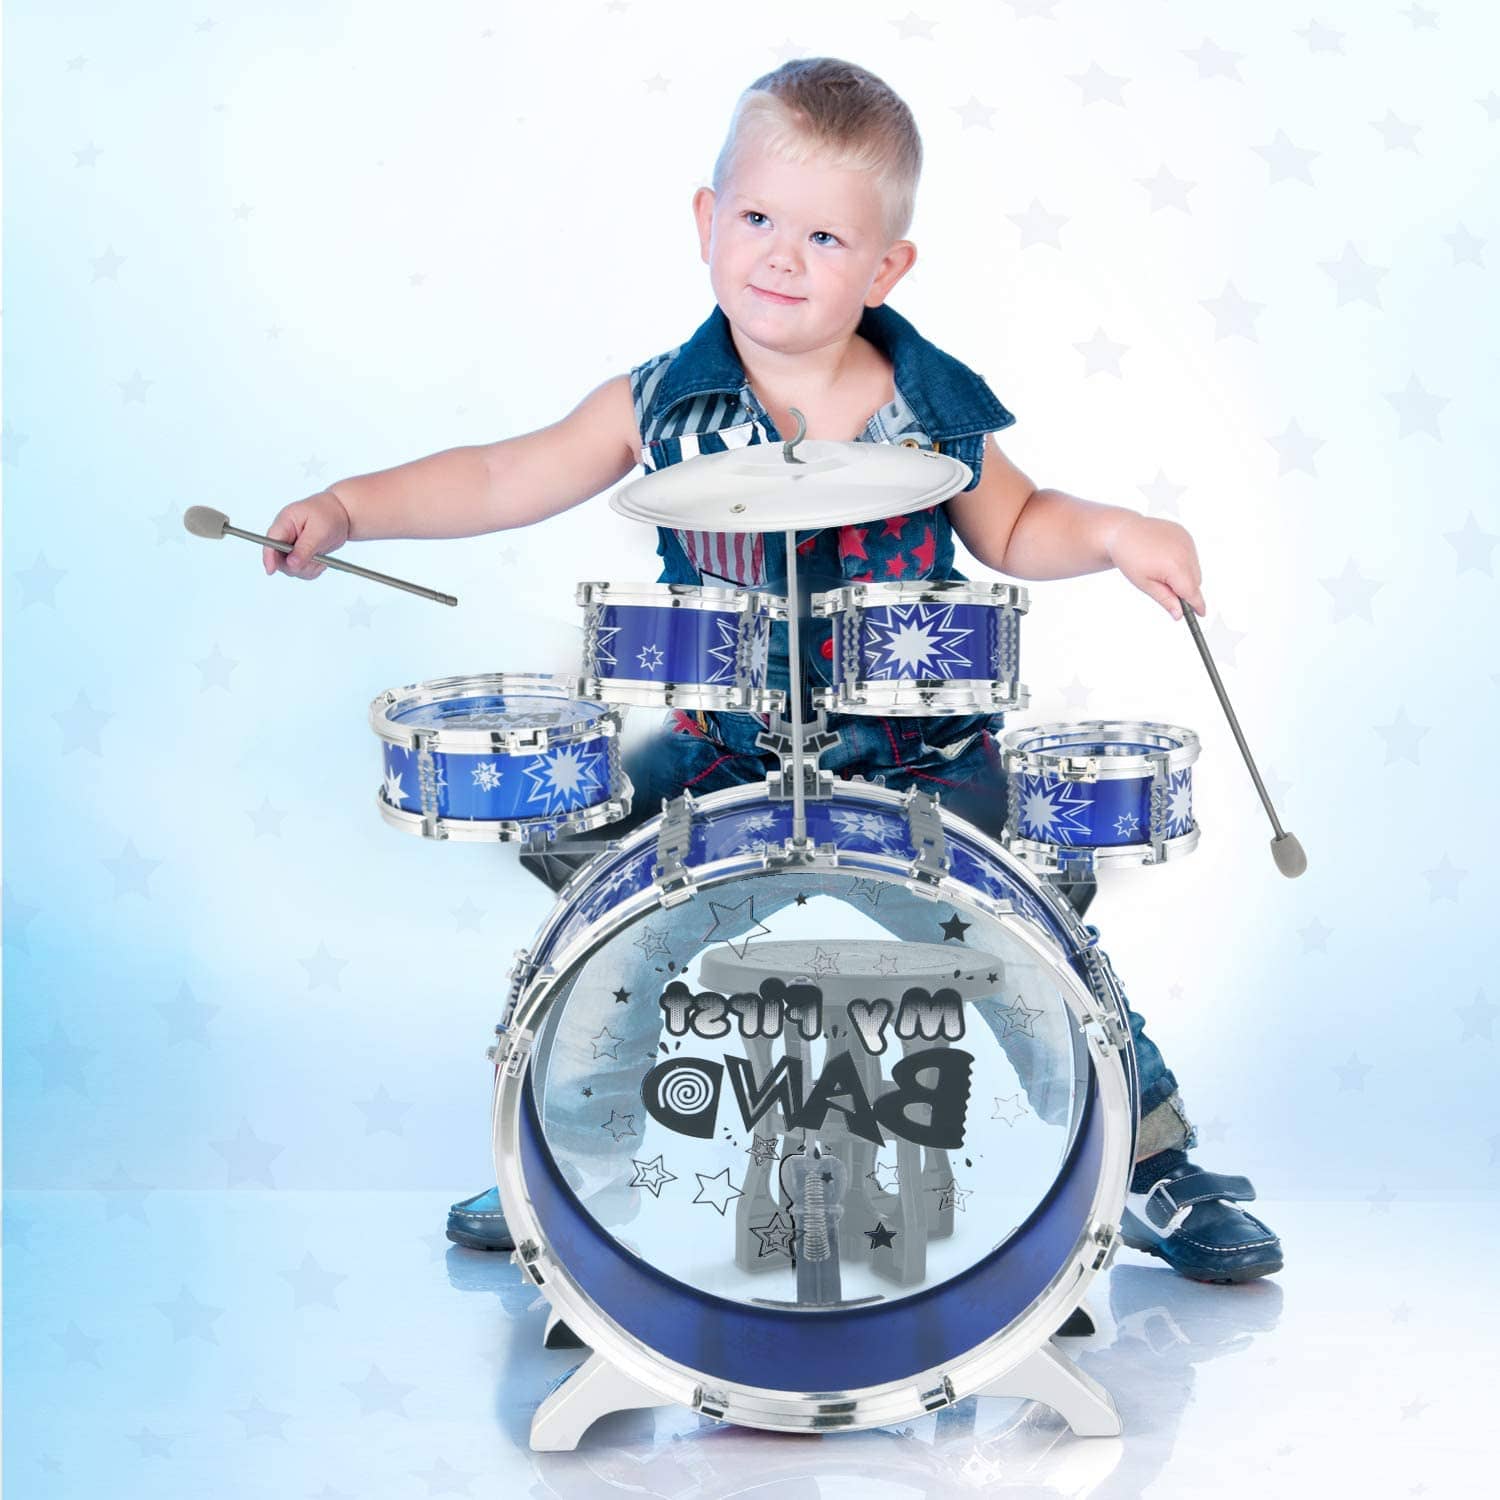 Reditmo Kids Jazz Drum Set, 6 Drums, 2 Cymbals, Chair, Kick Pedal, 2 Drumsticks, Stool, Early Education Musical Instrument to Develop Children’s Creativity, Red 19